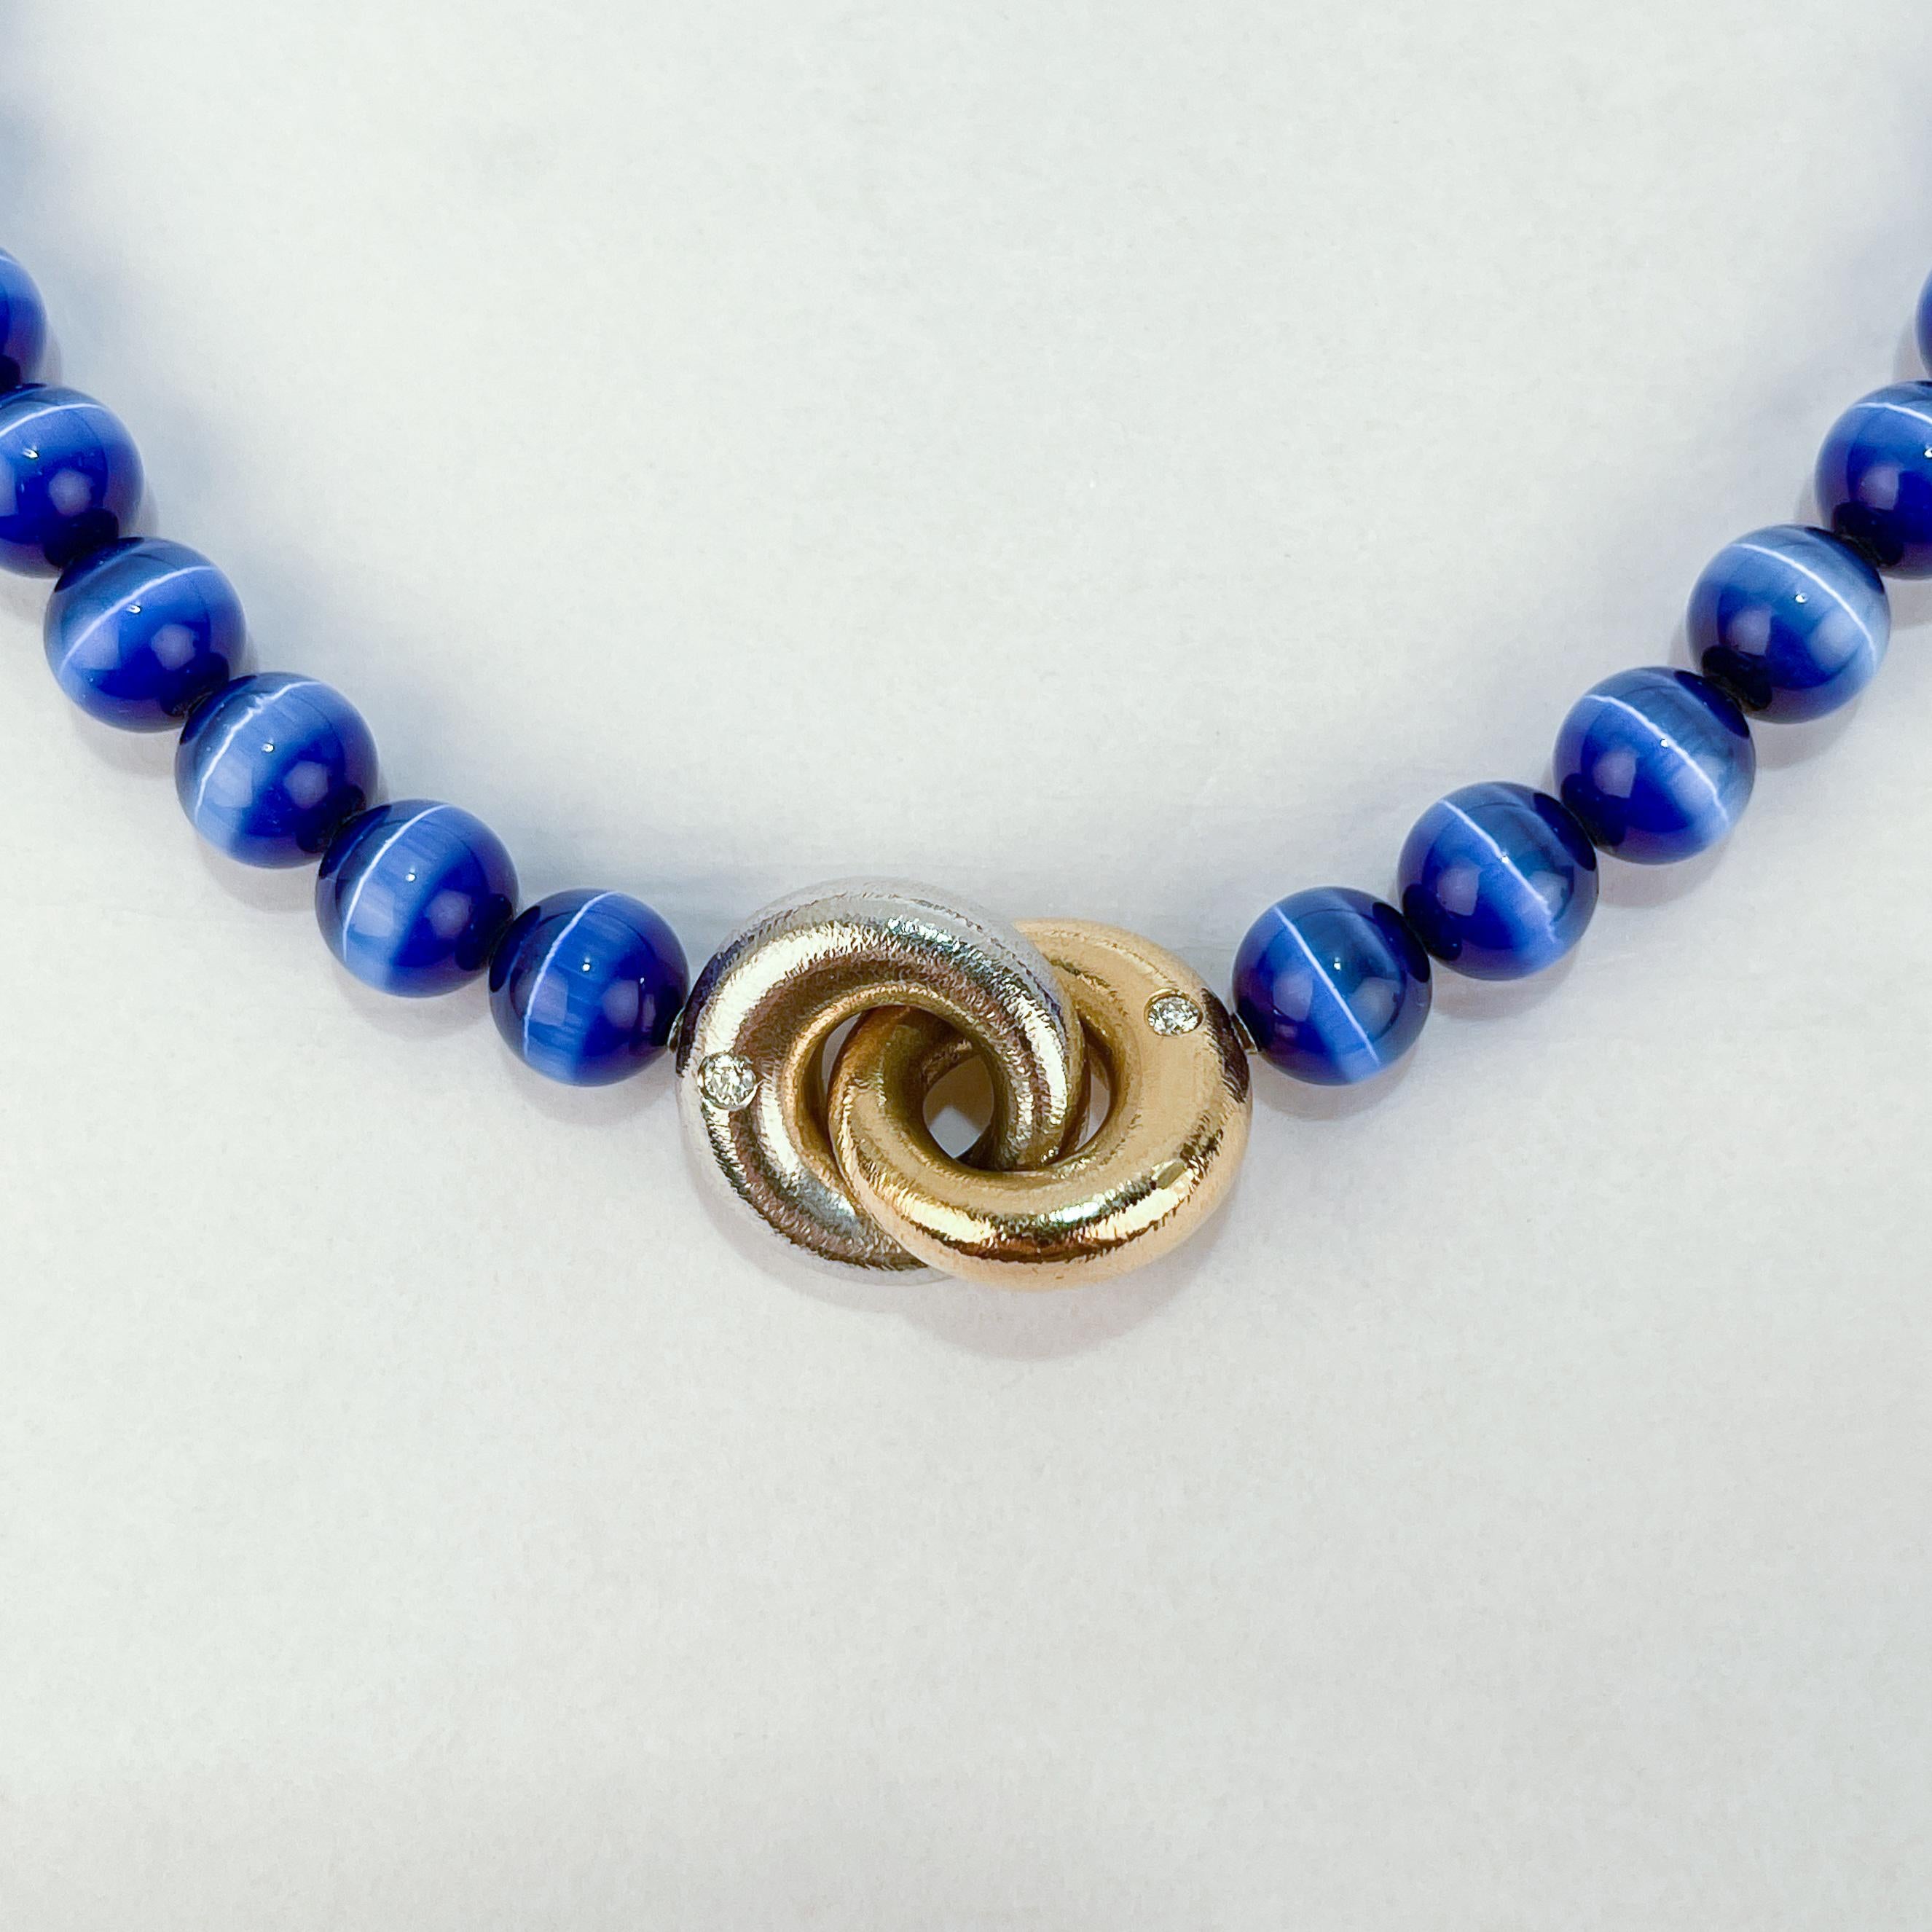 Women's or Men's Ole Lynggaard 14k Gold & Blue Tiger's Eye Beaded Collier or Choker Necklace For Sale